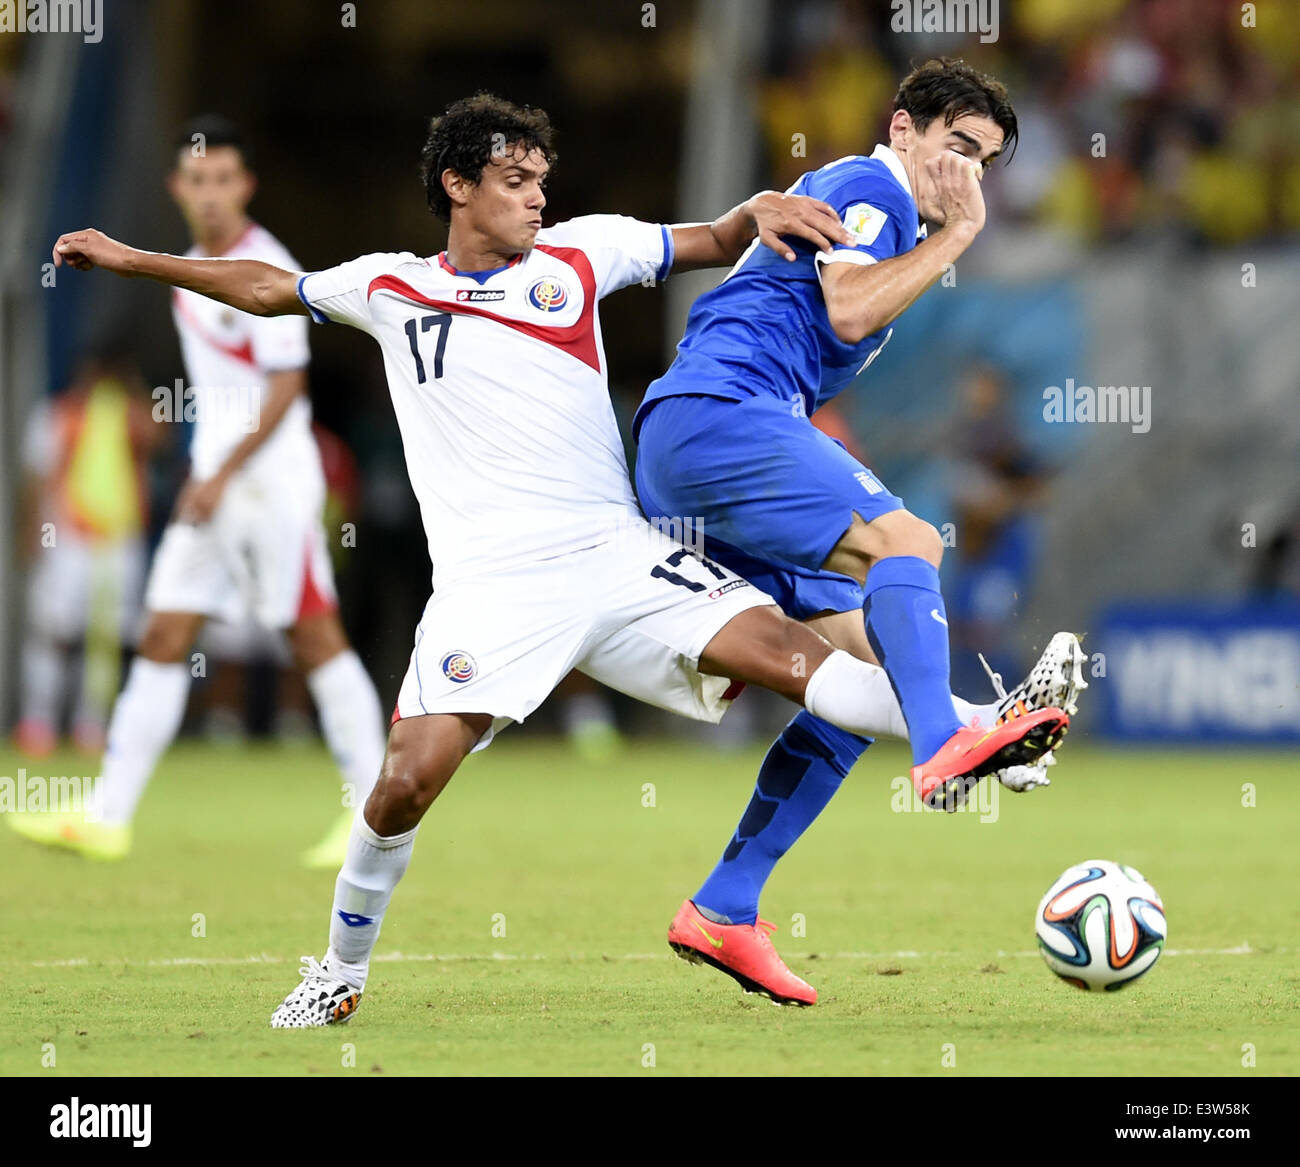 Recife, Brazil. 29th June, 2014. Costa Rica's Yeltsin Tejeda (L) competes during a Round of 16 match between Costa Rica and Greece of 2014 FIFA World Cup at the Arena Pernambuco Stadium in Recife, Brazil, on June 29, 2014. Credit:  Yang Lei/Xinhua/Alamy Live News Stock Photo